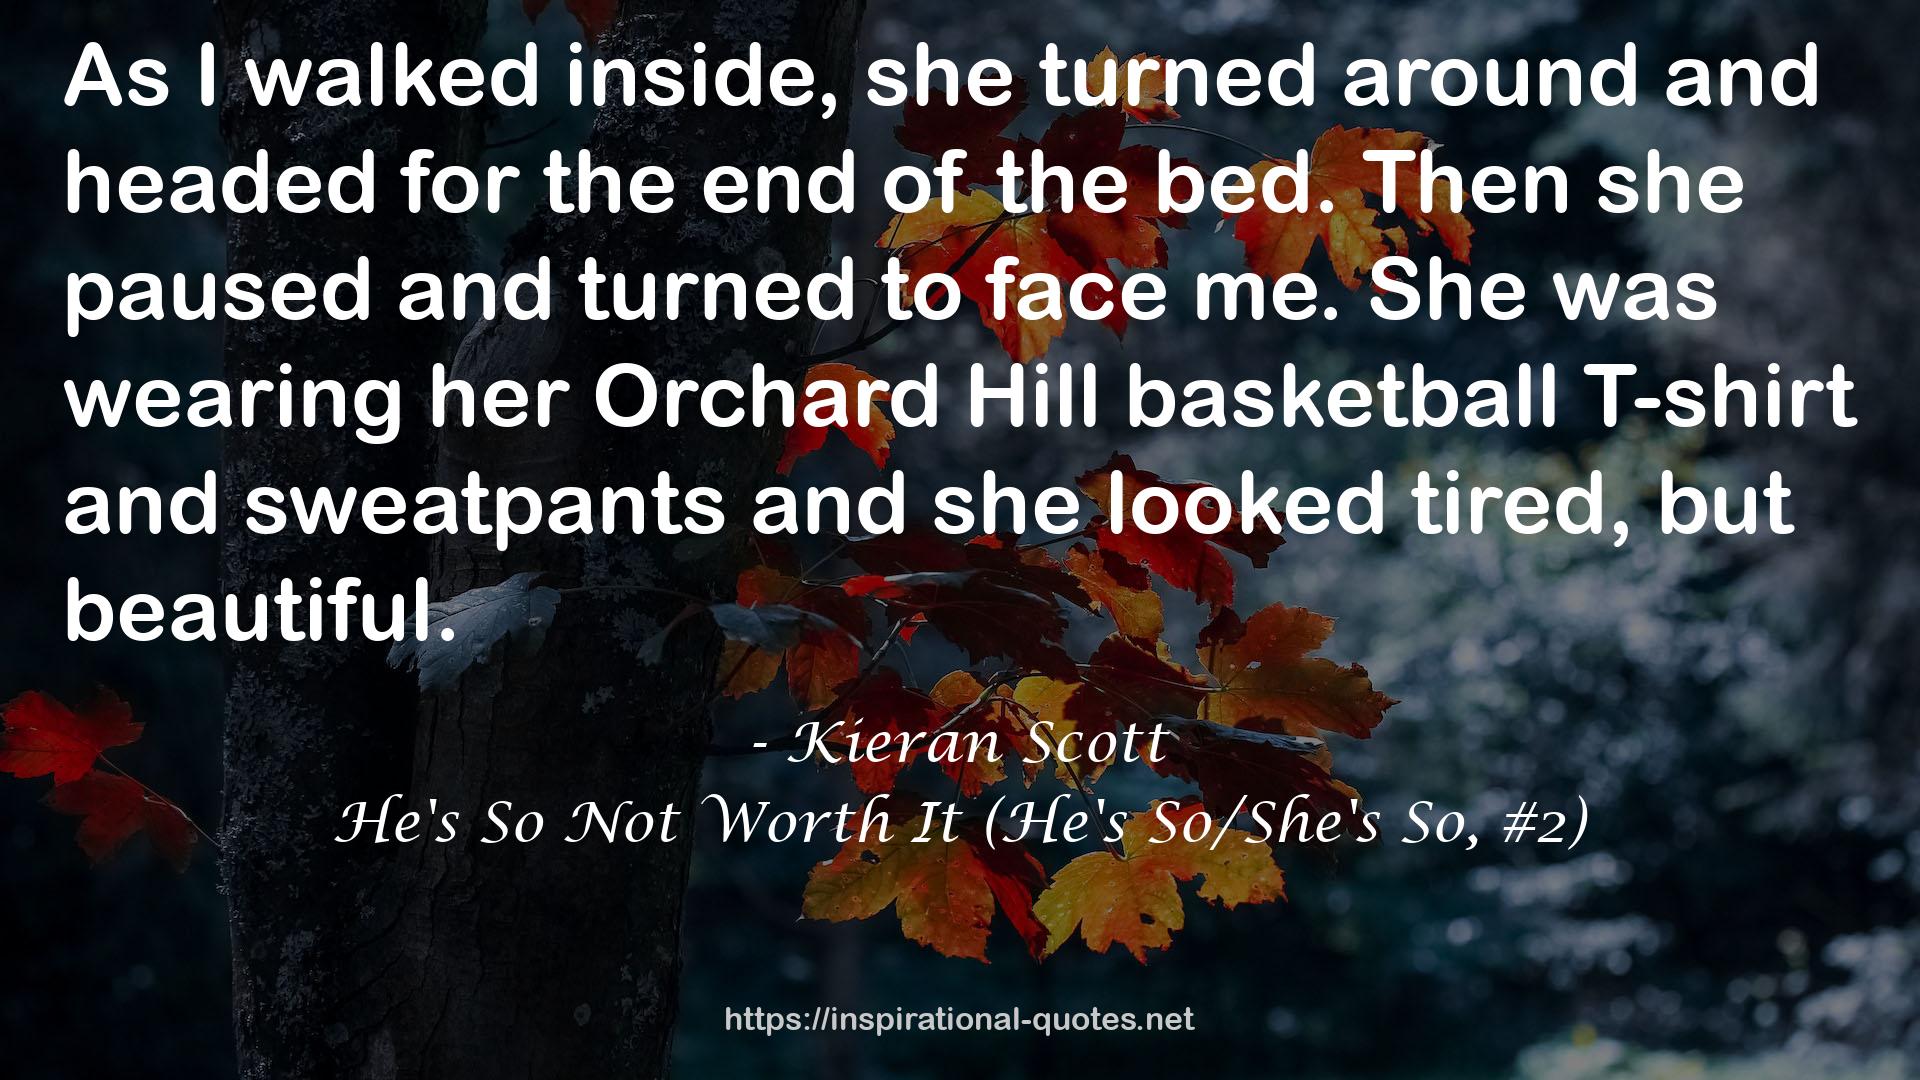 her Orchard Hill basketball T-shirt  QUOTES